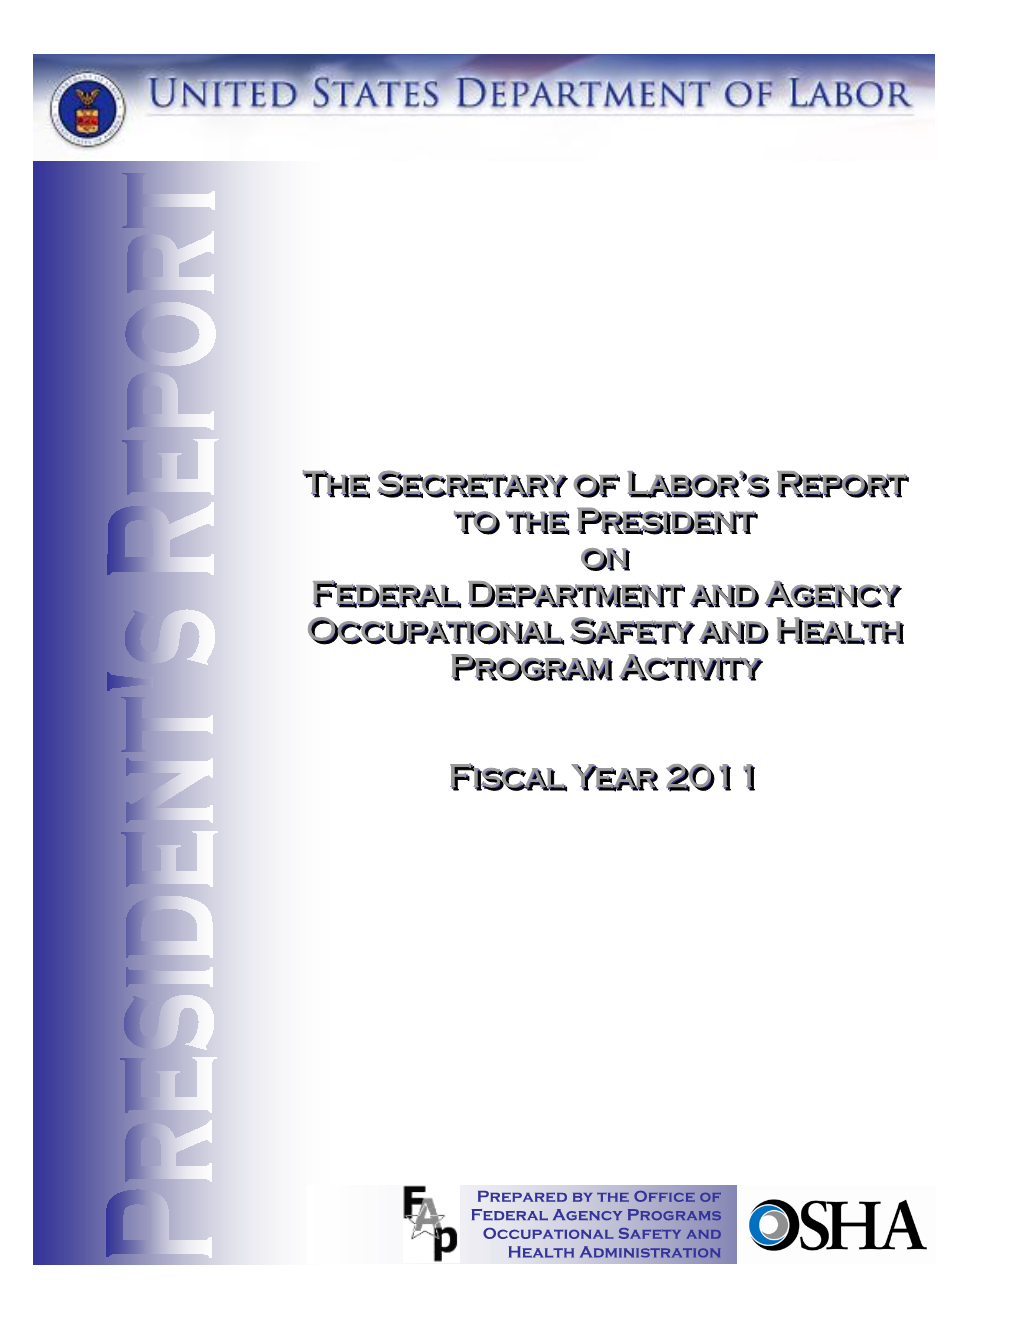 Secretary of Labor's Report to the President 2011